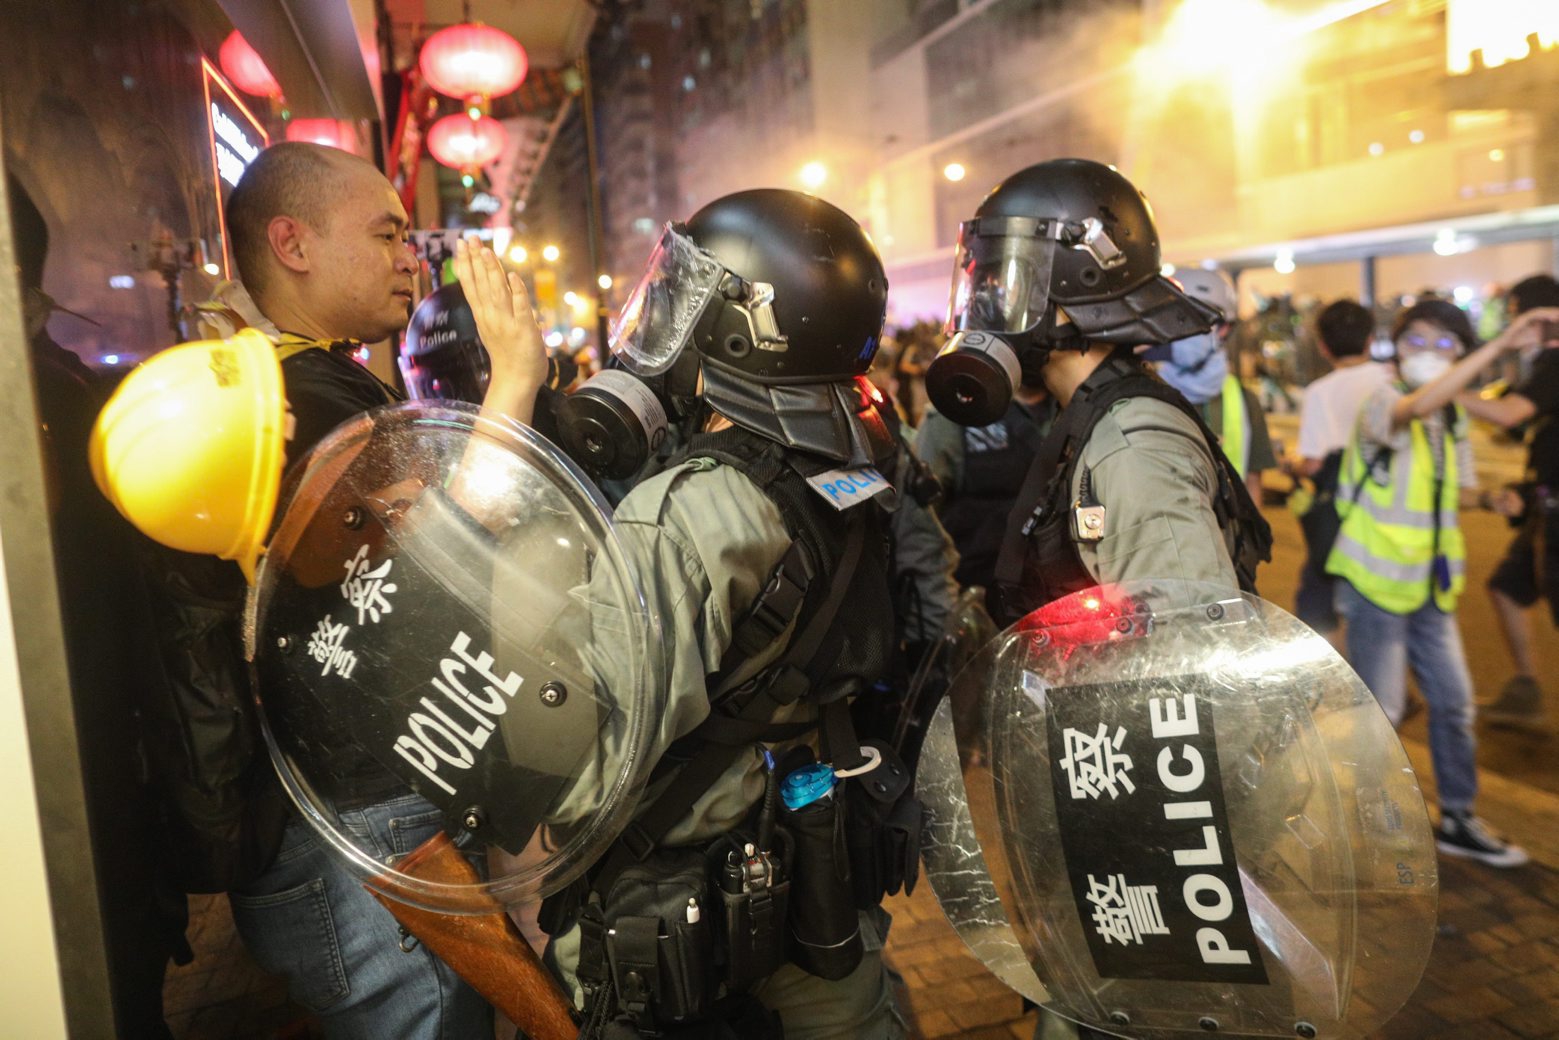 epa07745790 Riot police stop a protester taking part in a rally against the police brutality in Hong Kong, China, 28 July 2019. Hong Kong has a new mass rally with demonstrators protesting against the police brutality on 27 July in Yuen Long, another mass protest was held and ended up with clashes between protesters and the police when riot police fired rubber bullets, tear gas and pepper spray to disperse the crowd.  EPA/JEROME FAVRE CHINA HONG KONG PROTEST RALLY